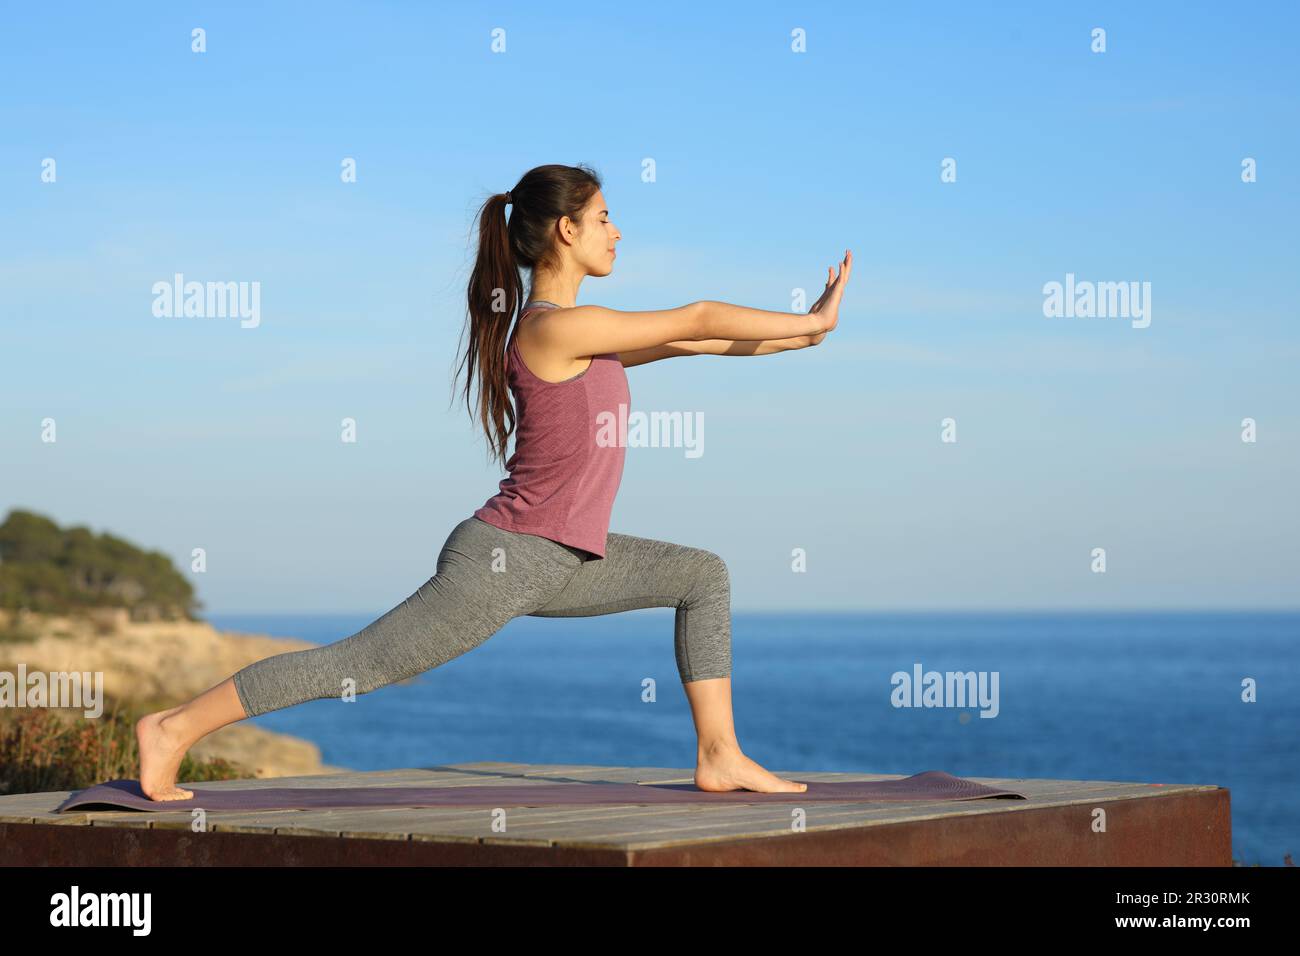 Full body profile of a woman doing tai chi exercise on the beach Stock ...